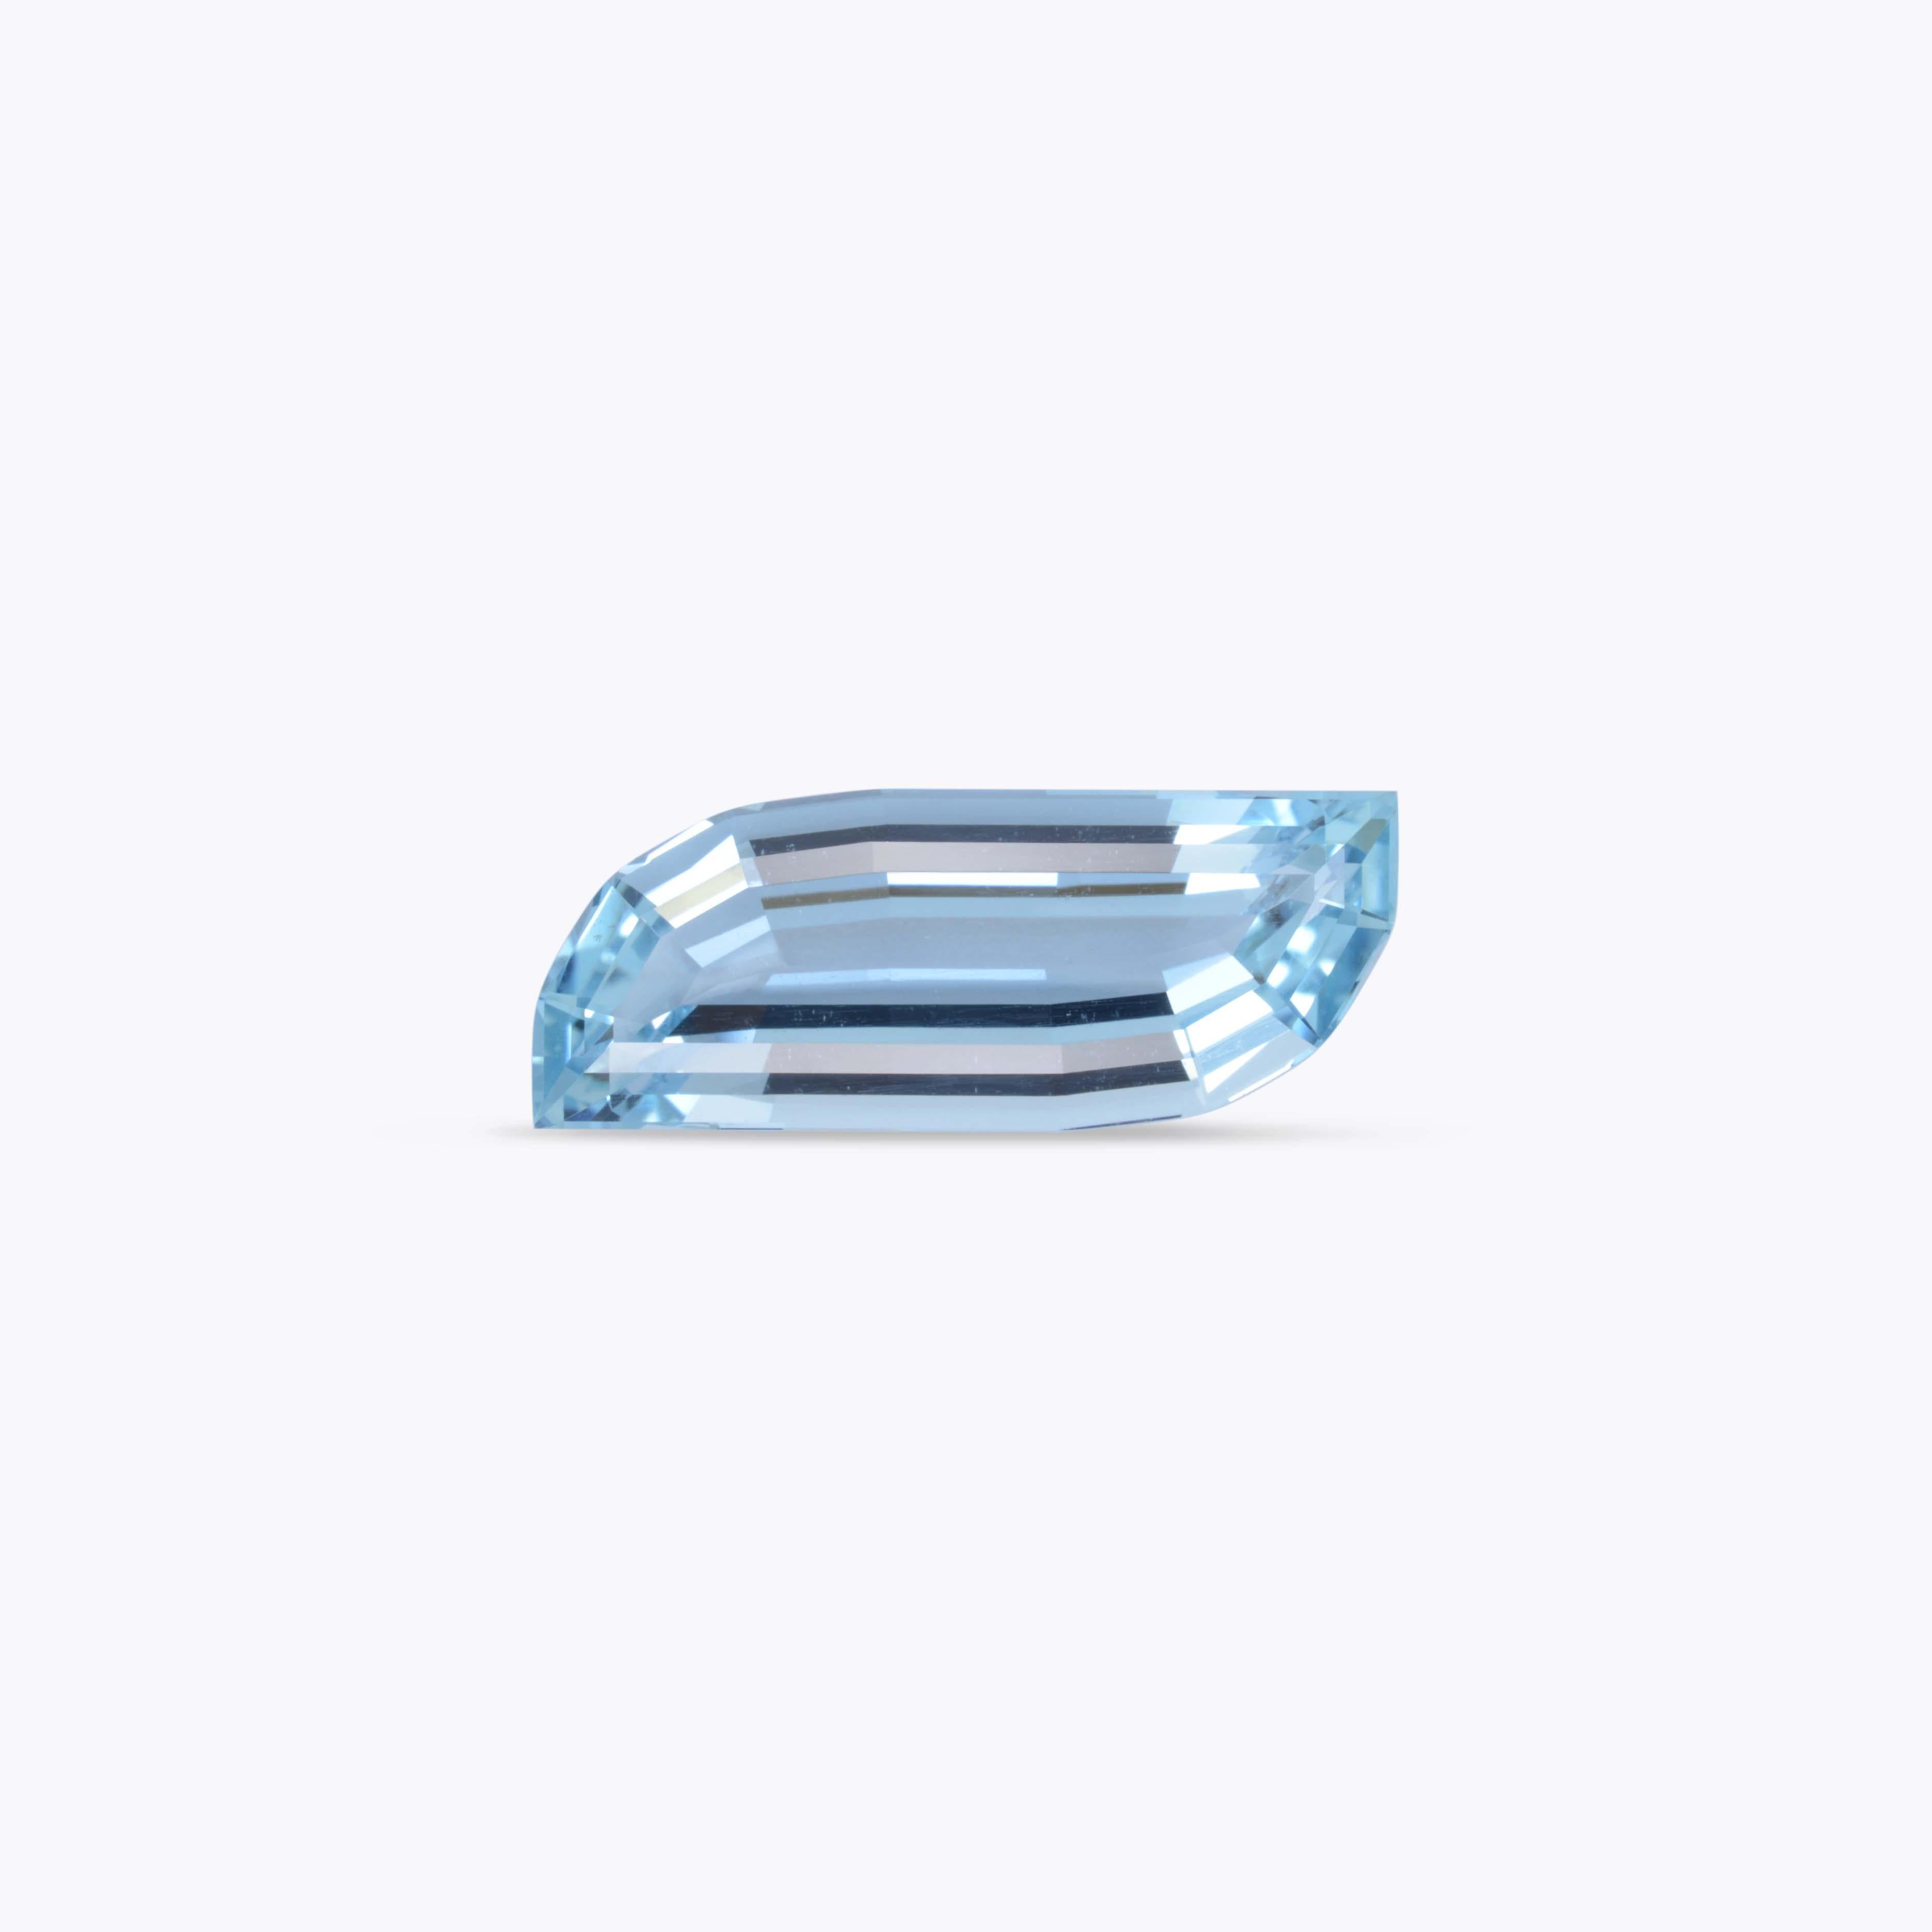 One of a kind 13.89 carat unmounted Aquamarine Leaf shaped gem, offered loose to a fine gemstone collector.
Dimensions: 27.20 x 10.00 x 7.50 mm
Returns are accepted and paid by us within 7 days of delivery.
We offer supreme custom jewelry work upon